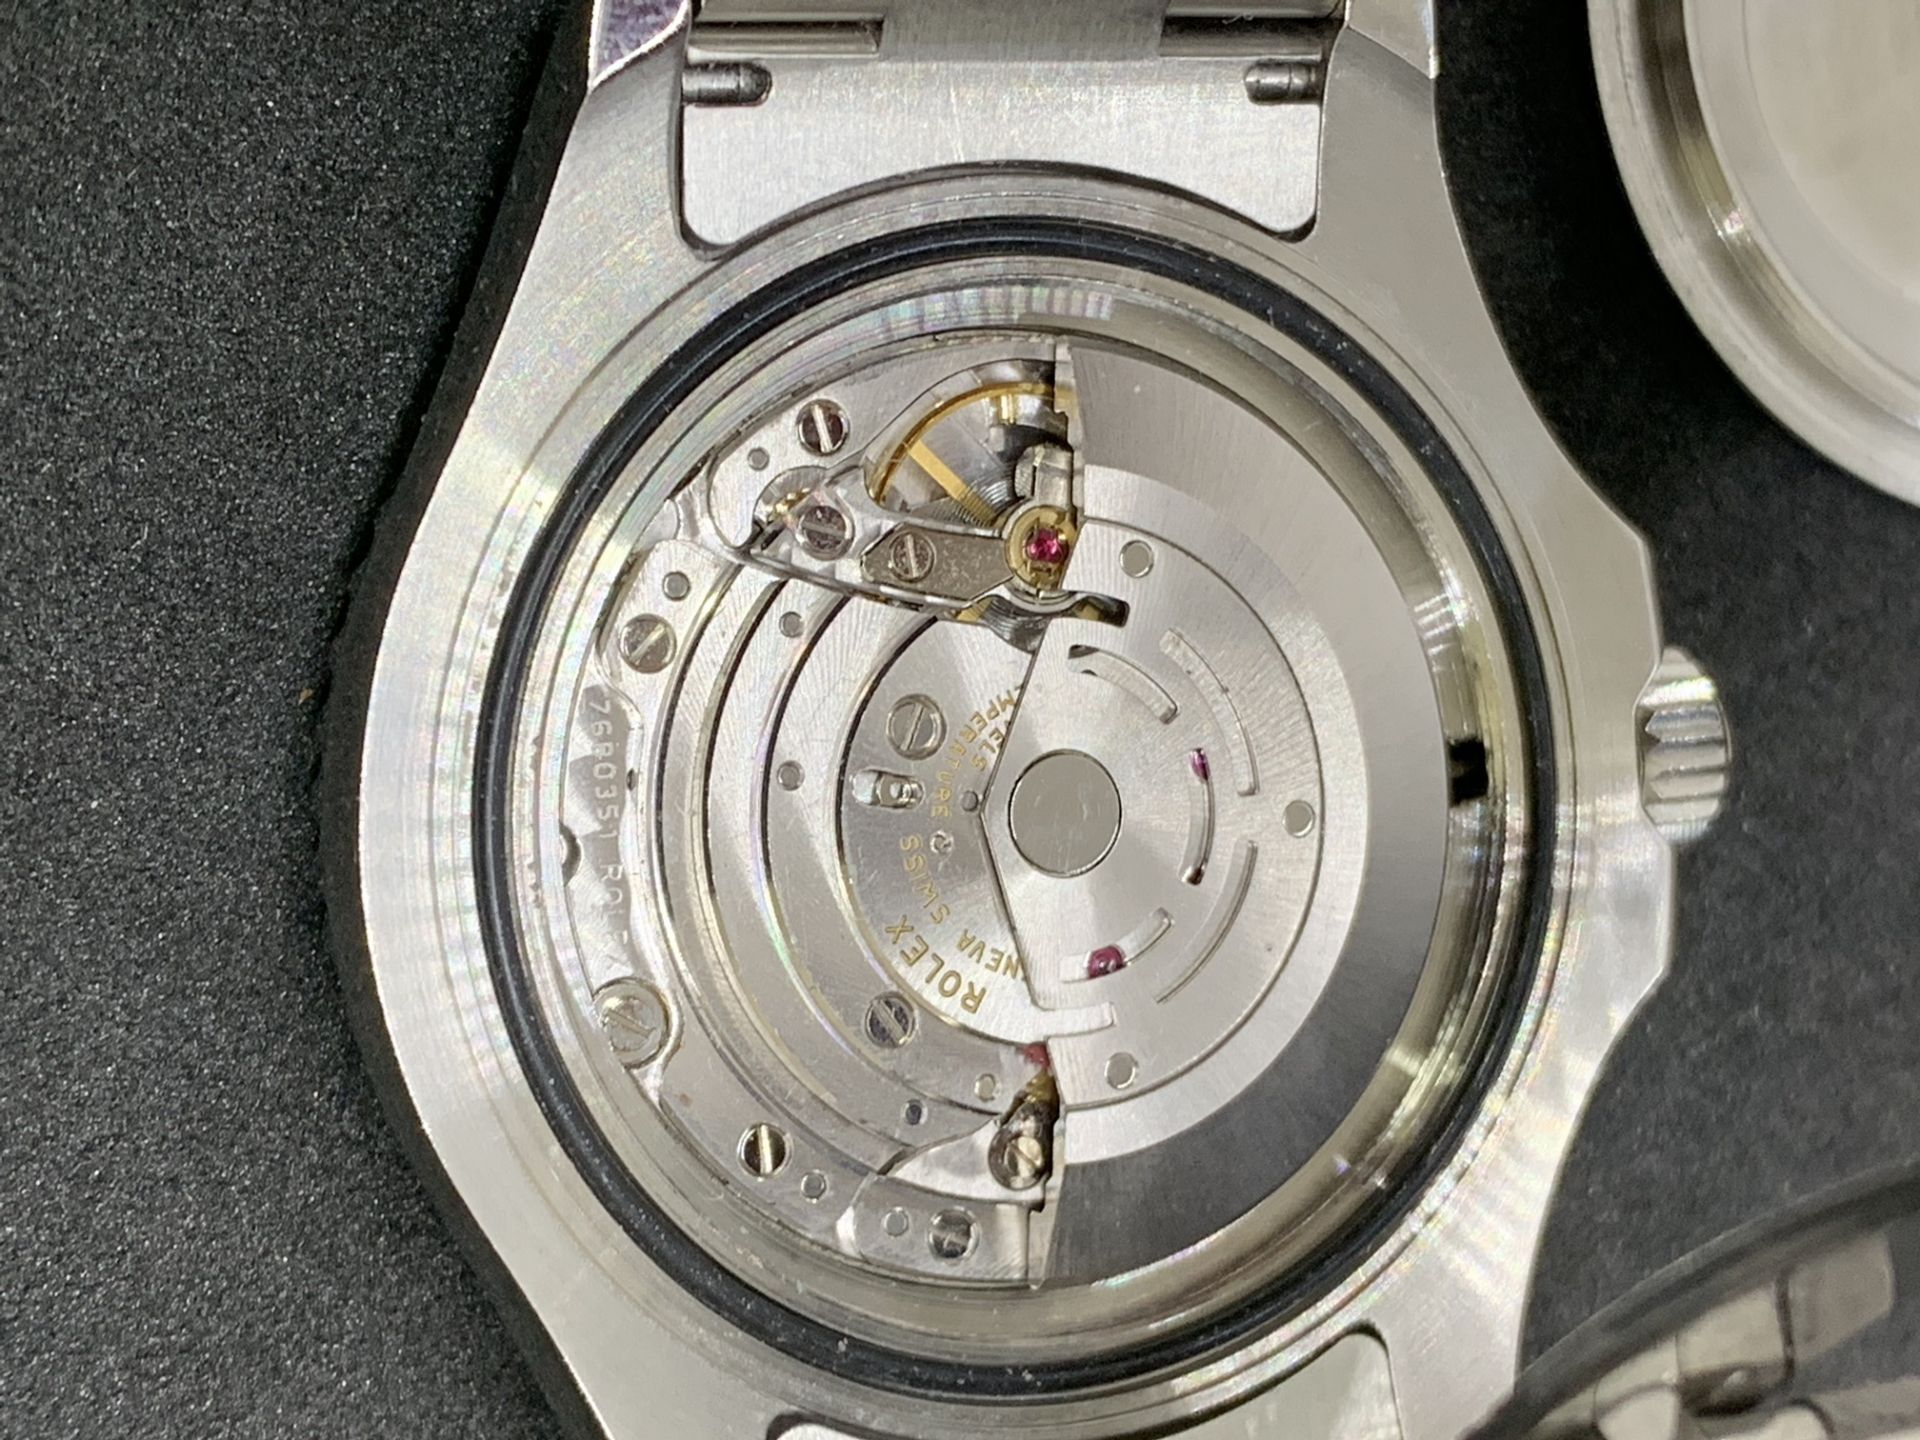 WATCH MARKED ROLEX WITH GENUINE ROLEX MOVEMENT - Image 6 of 10